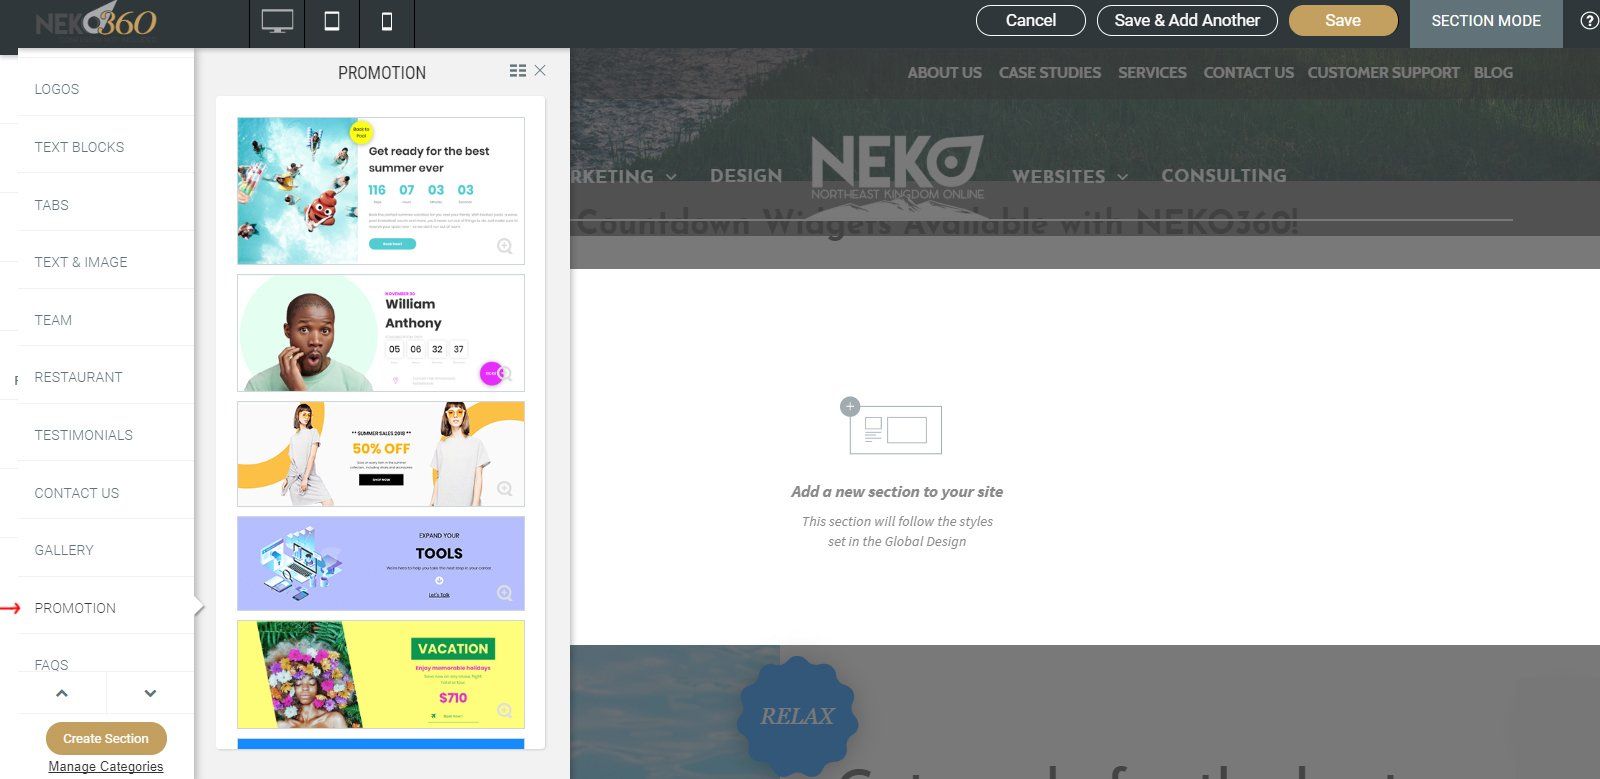 How to add Promotional items to your NEKO360 Website?